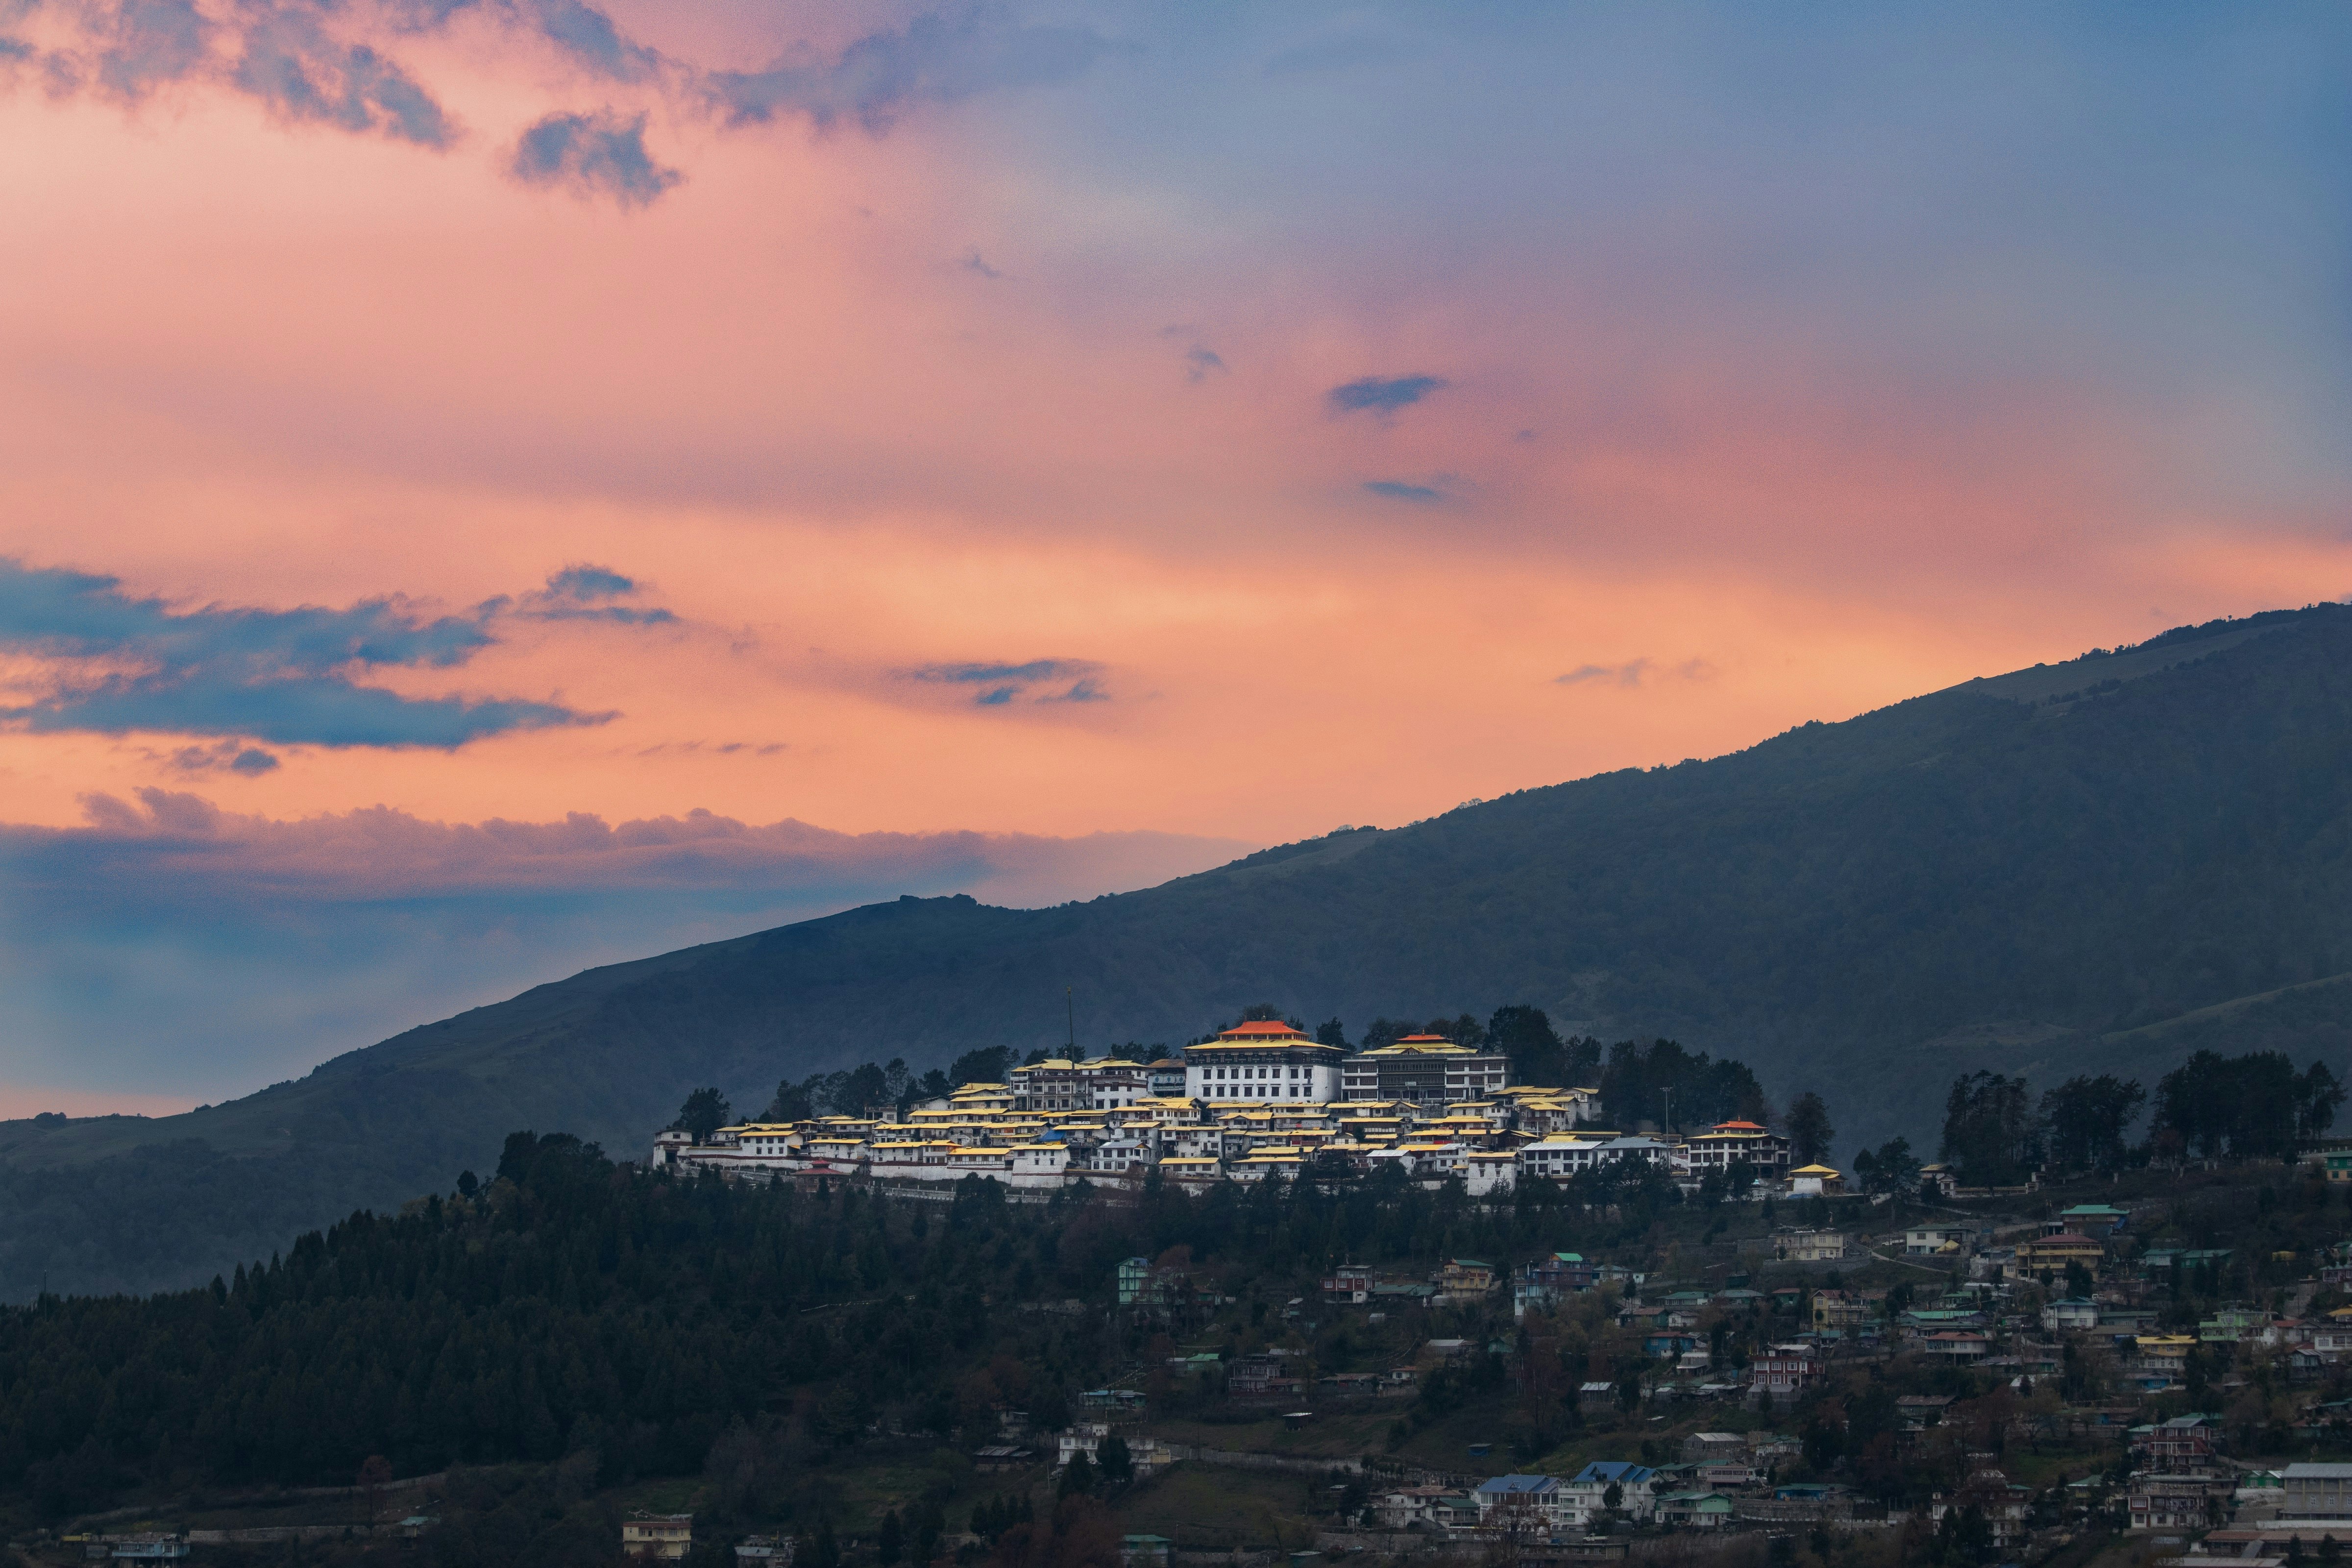 The top of a mountain is filled with countless white buildings with gold roofs, all part of the Tawang monastery.